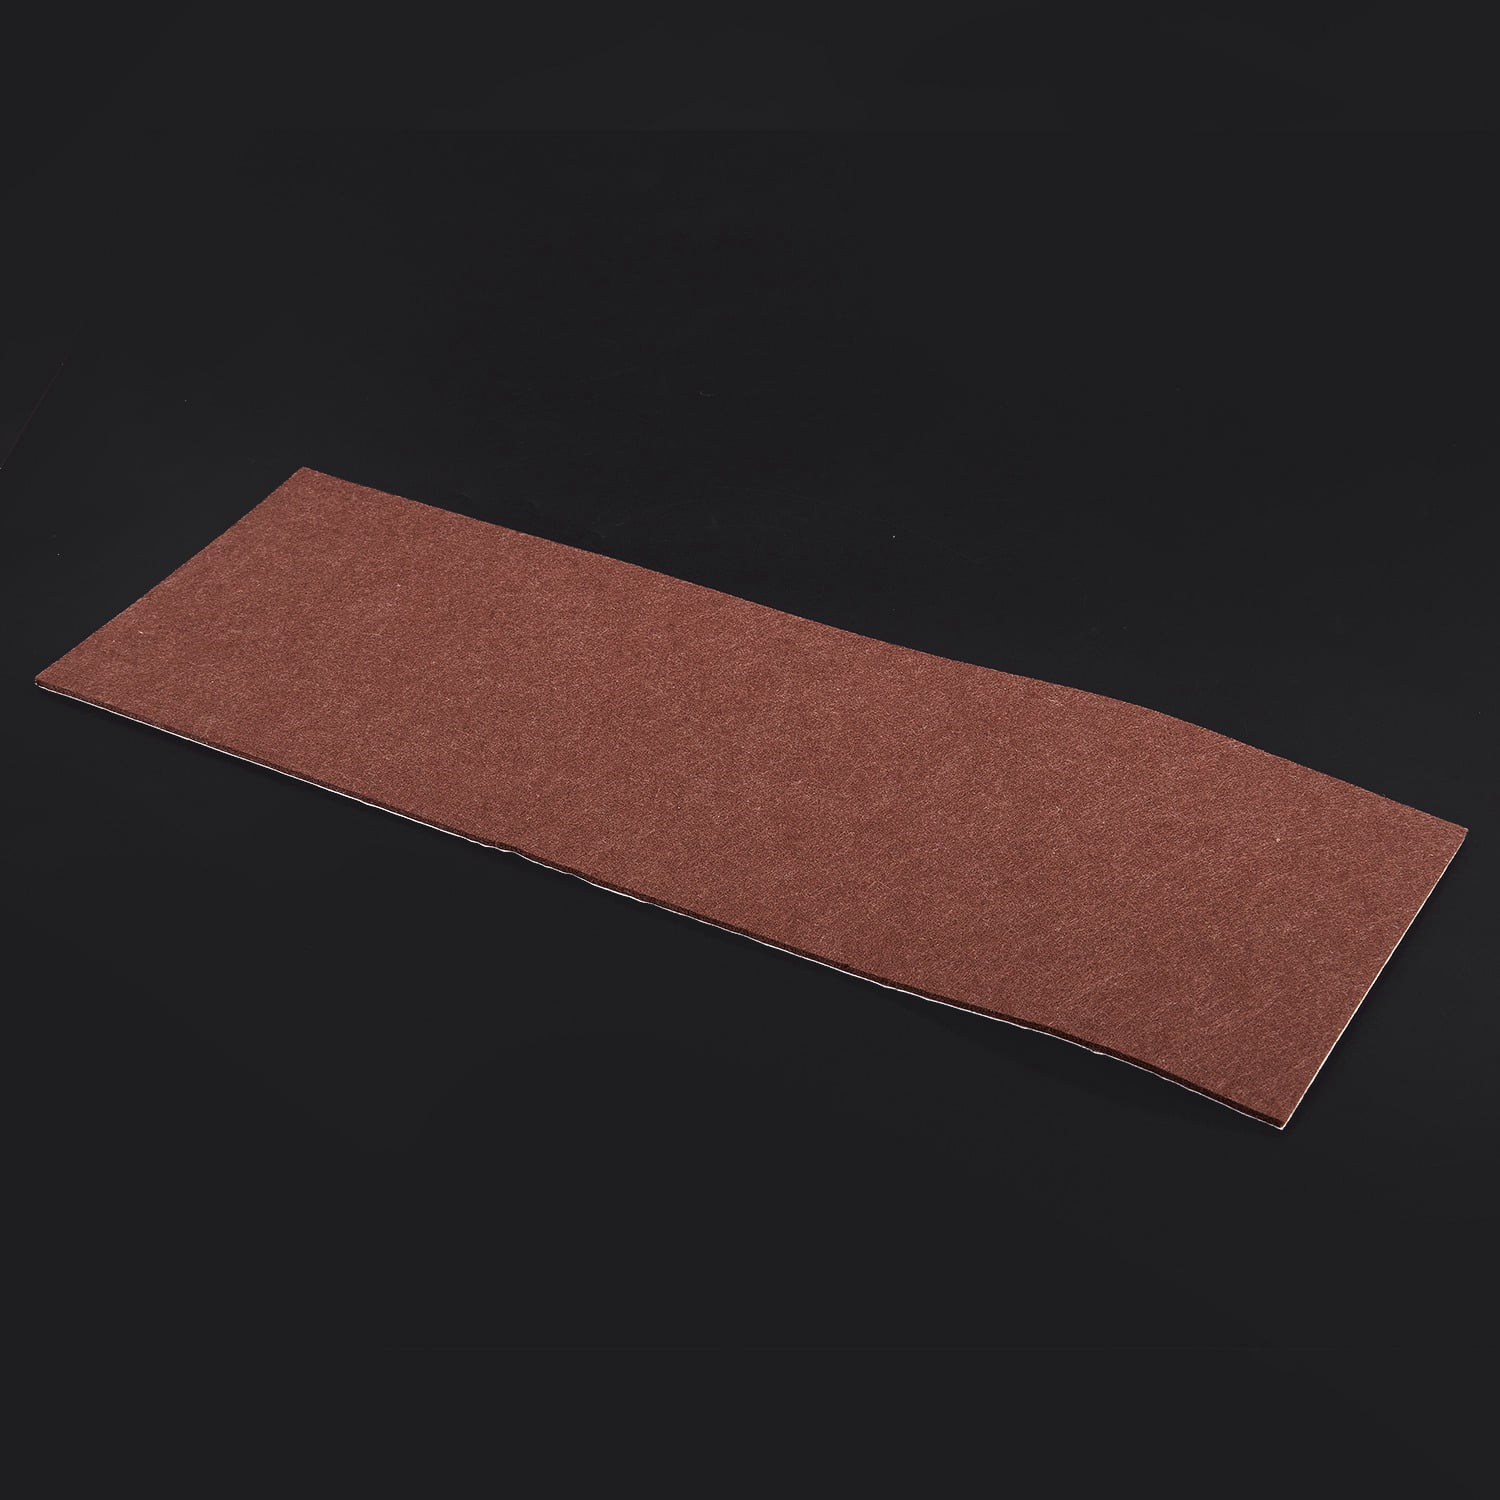 Self-Stick Furniture Felt Sheet For Hard Surfaces To Cut Into Any Shape 